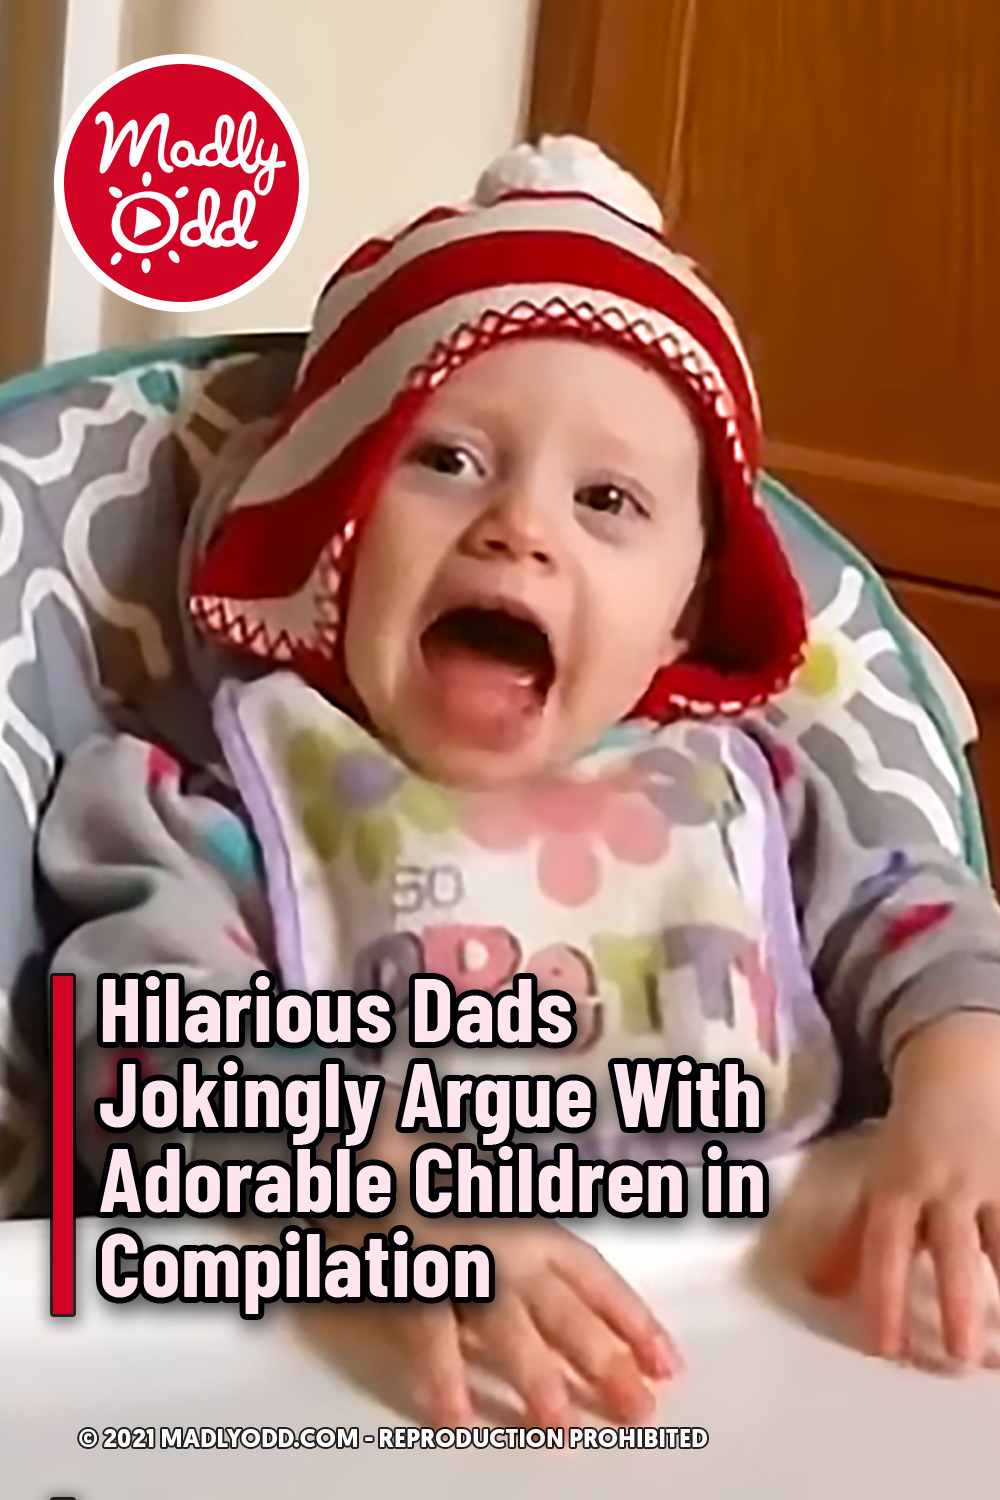 Hilarious Dads Jokingly Argue With Adorable Children in Compilation